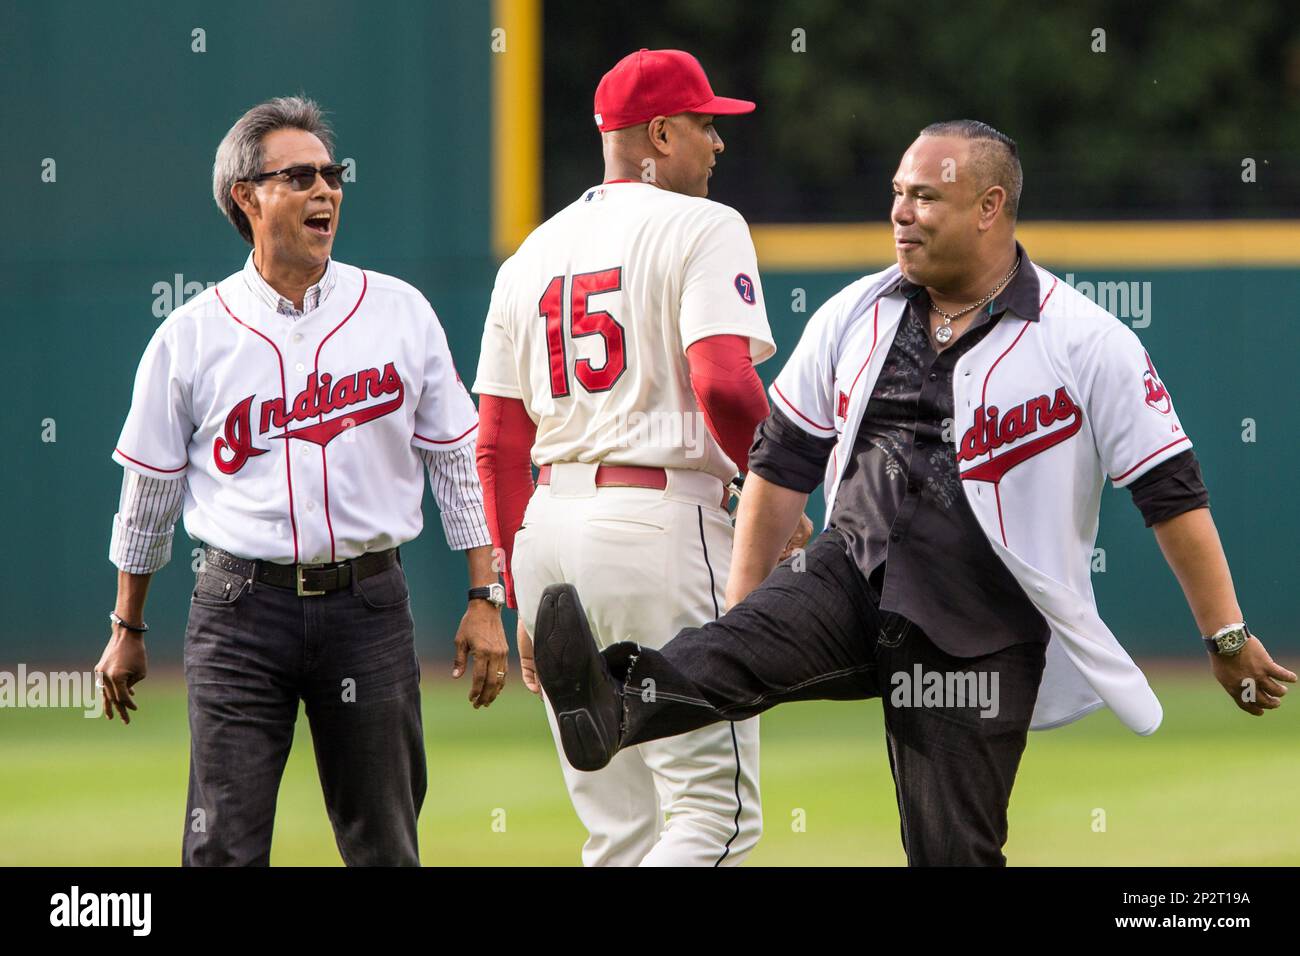 20 June 2015: Dennis Matrinez, Sandy Alomar, and Carlos Baerga as the 1995  Cleveland Indians American League Championship team is honored prior to the  game between the Tampa Bay Rays and Cleveland